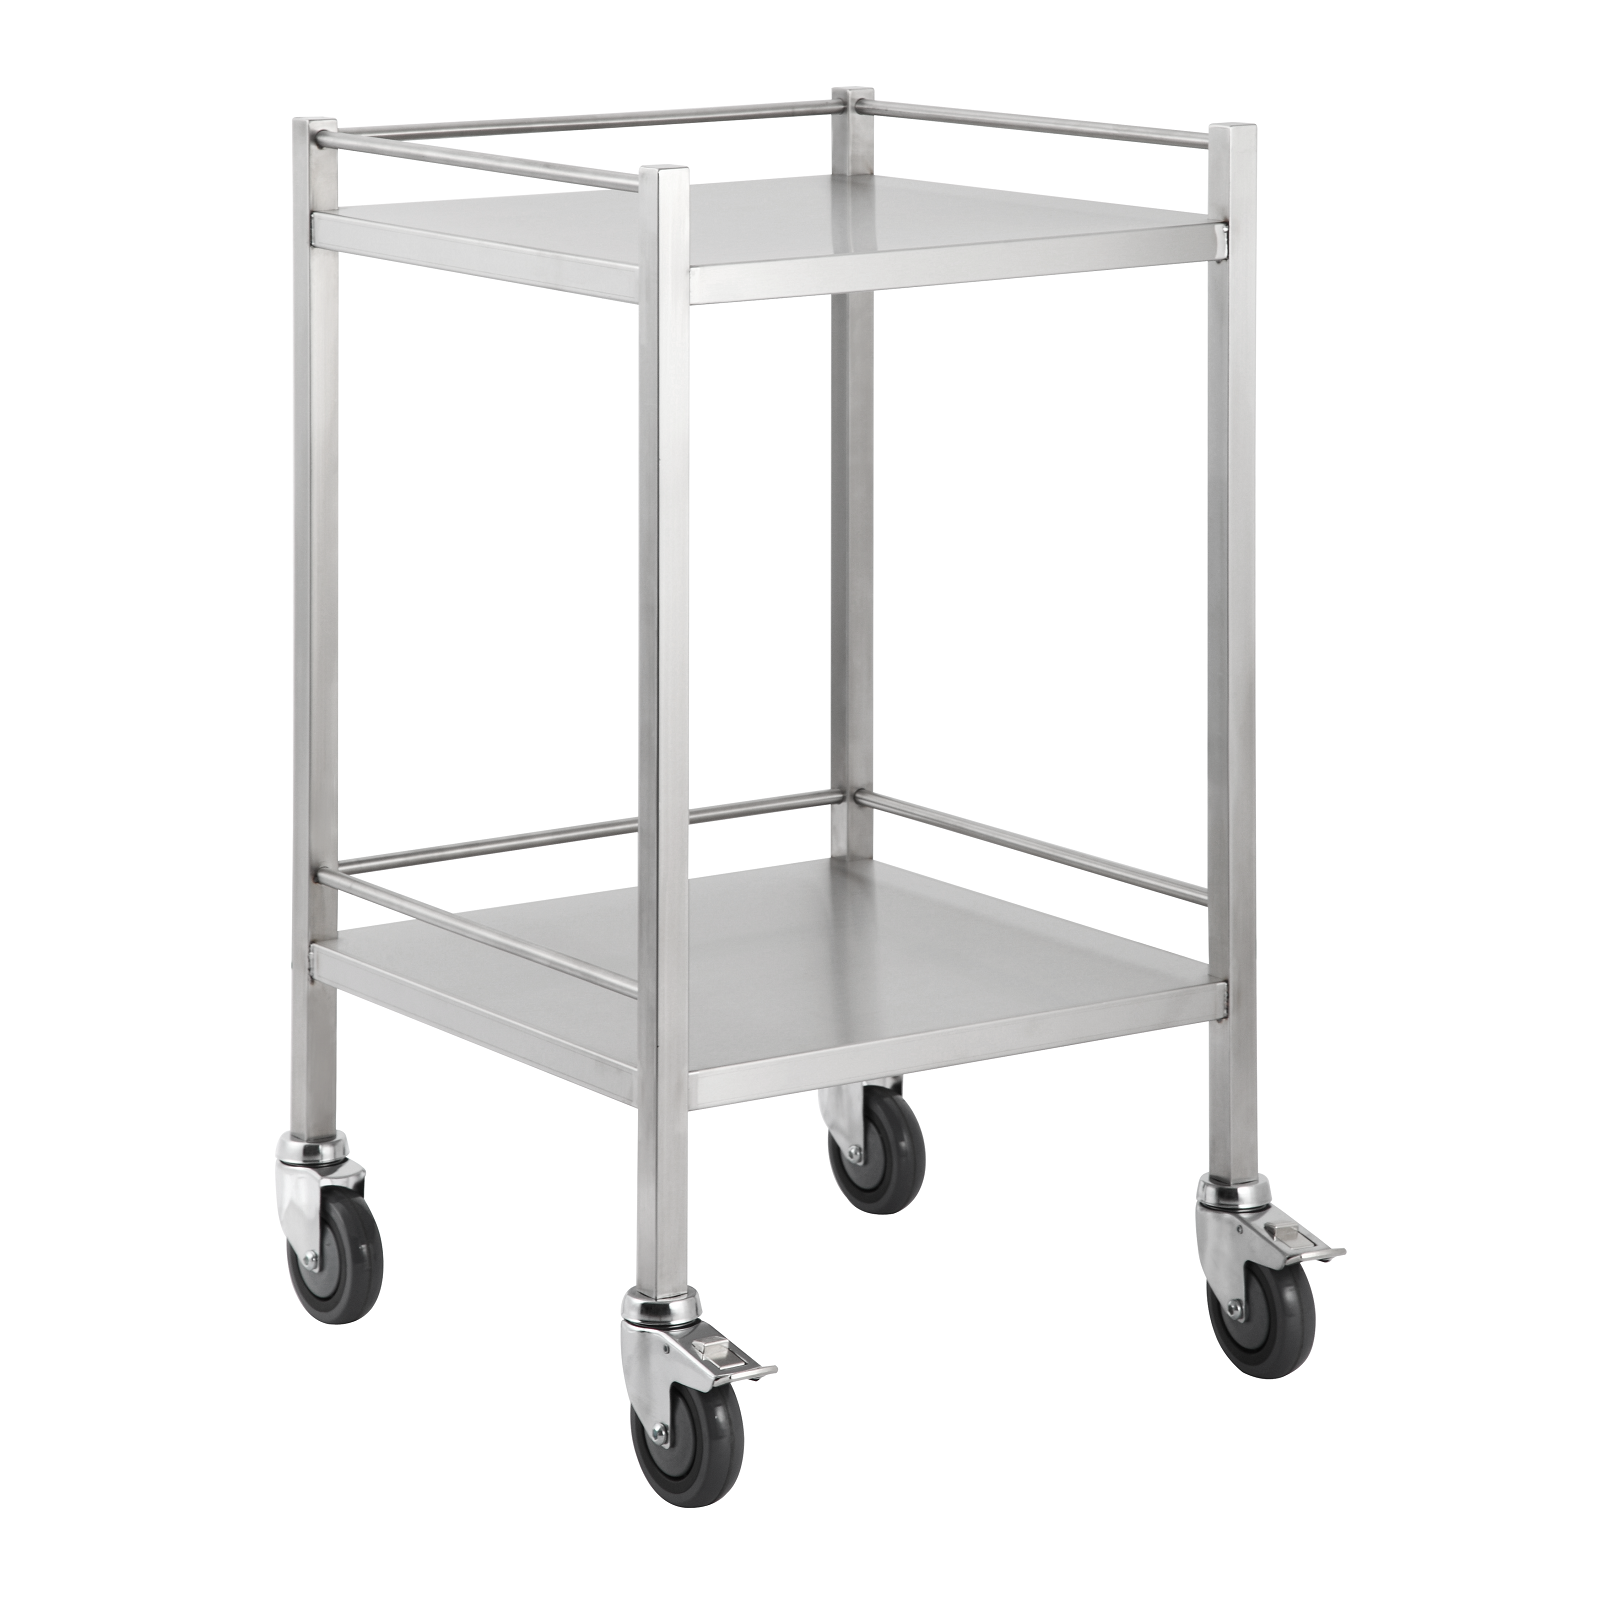 A high grade stainless steel trolley with smooth rolling castors, shelf, rails and an outstanding finish.